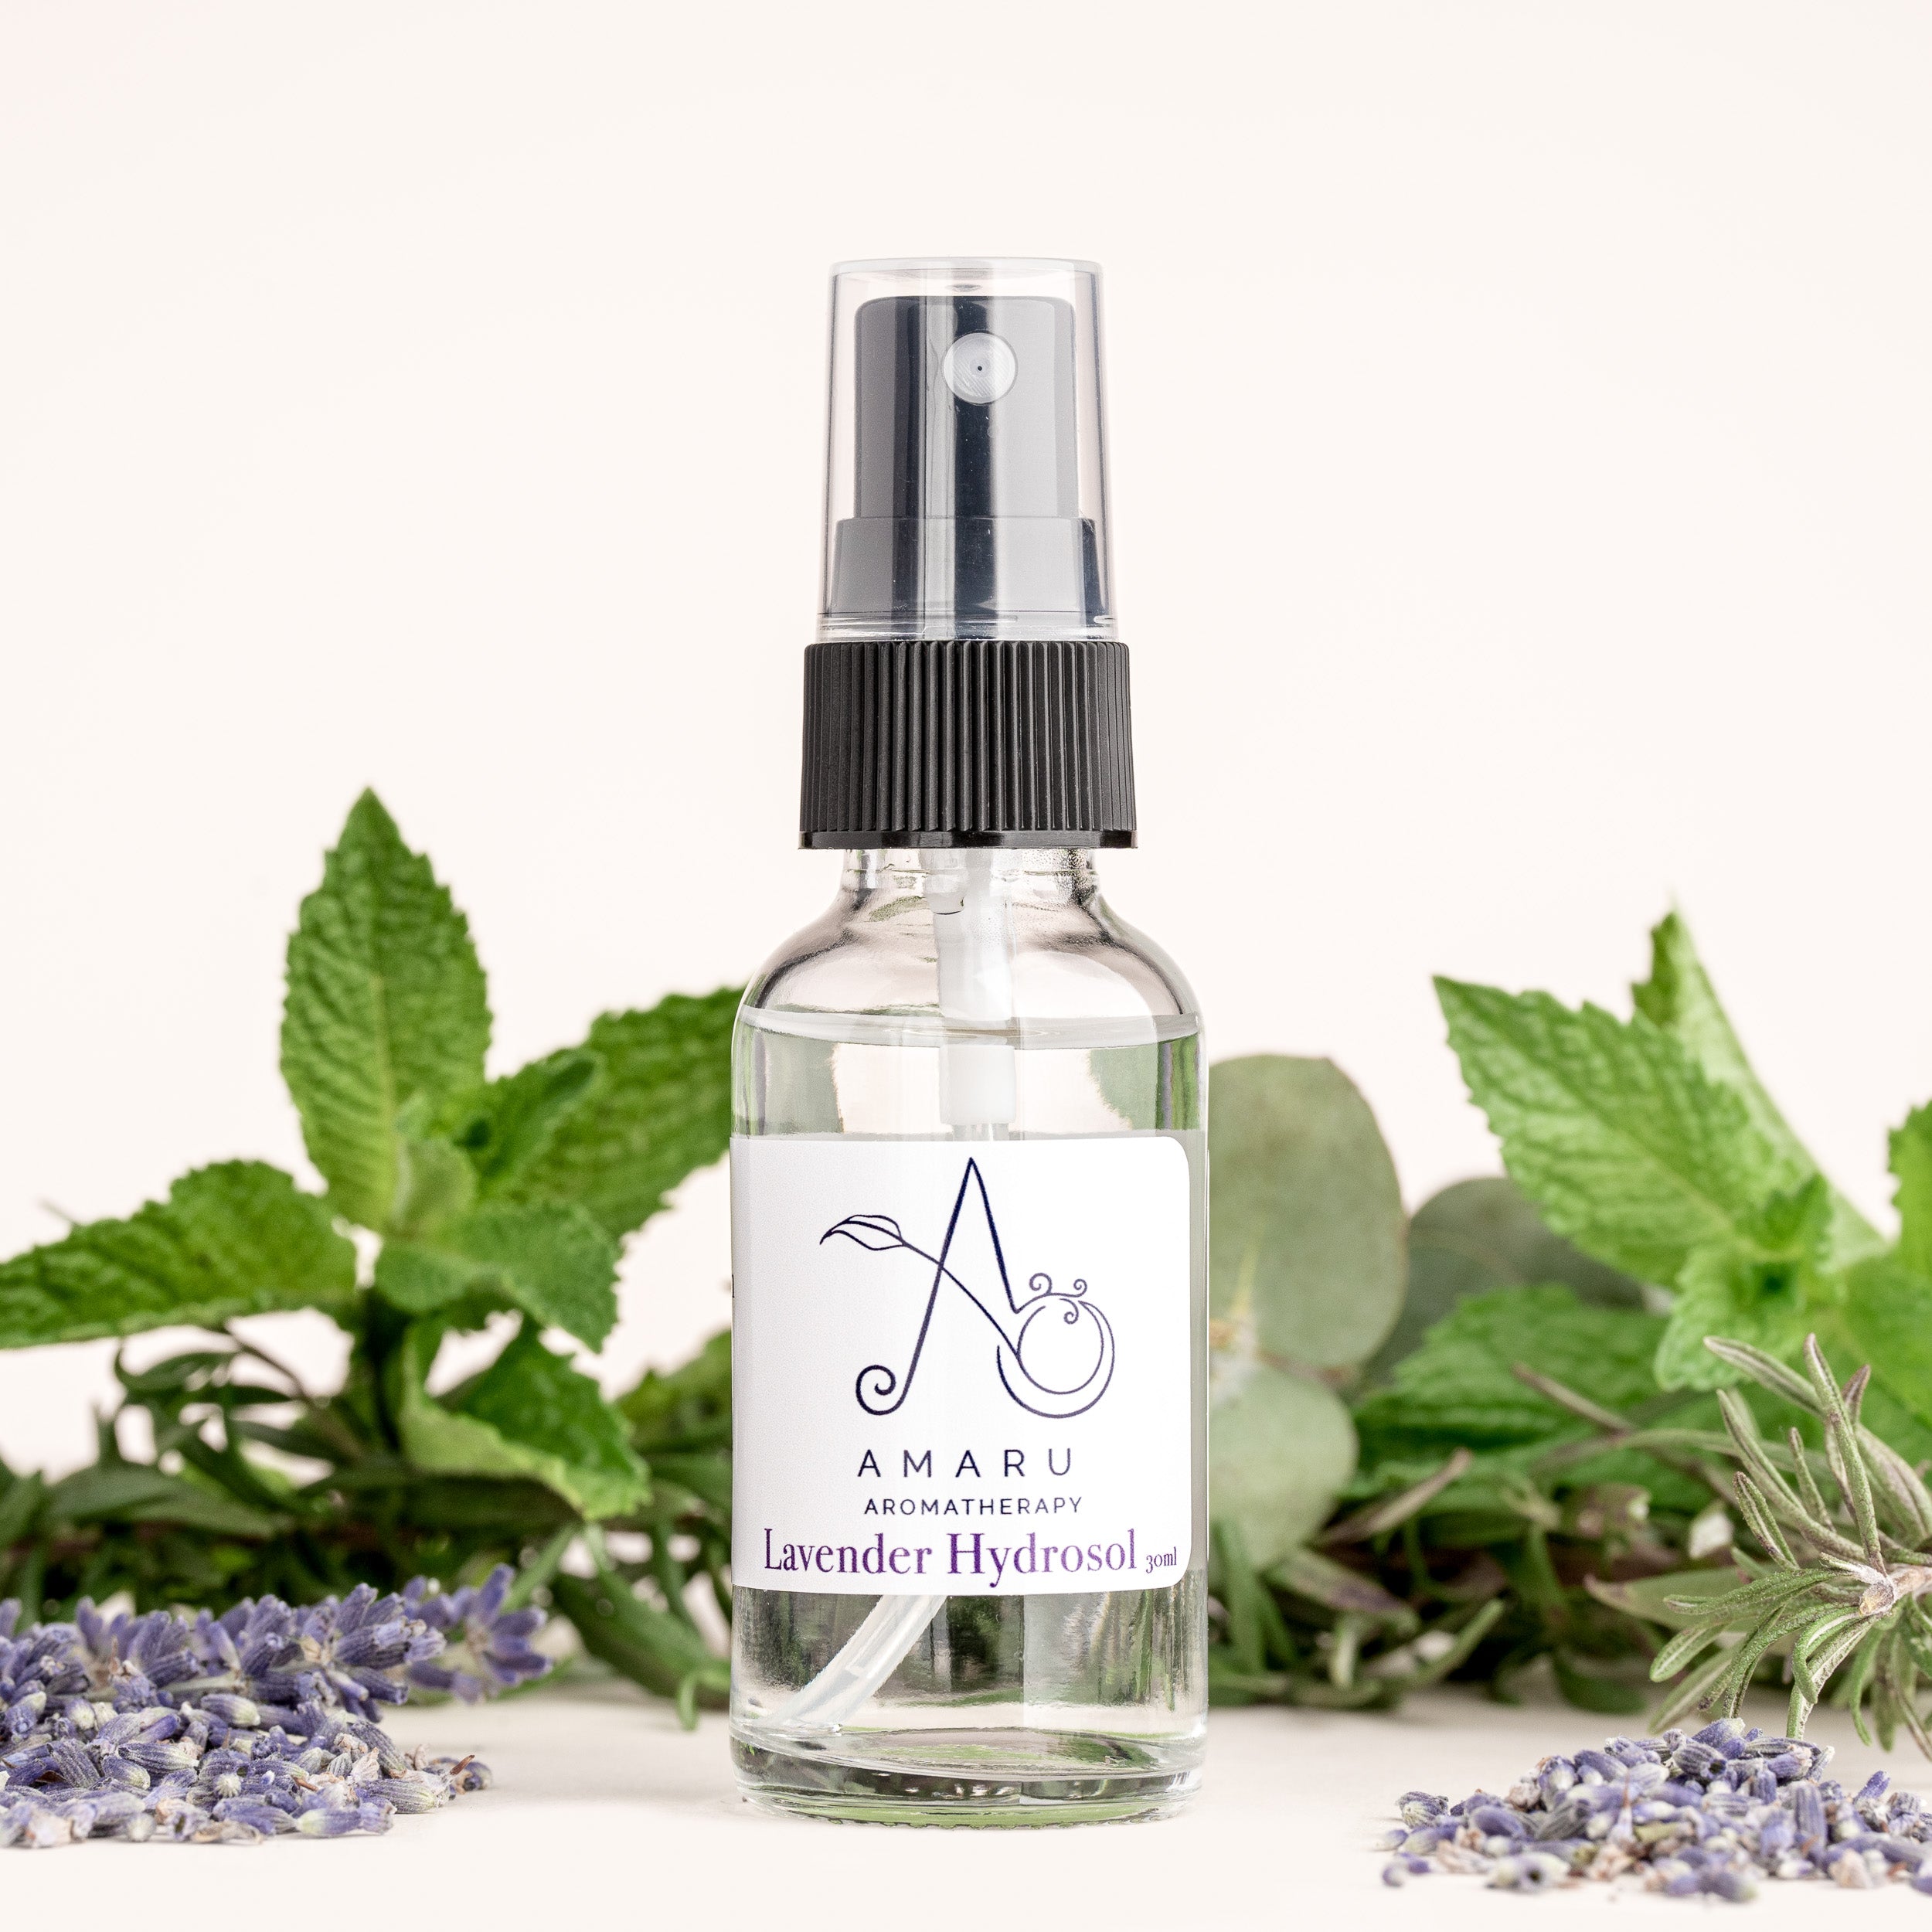 Lavender Hydrosol: Soothe Your Senses with Floral Delight